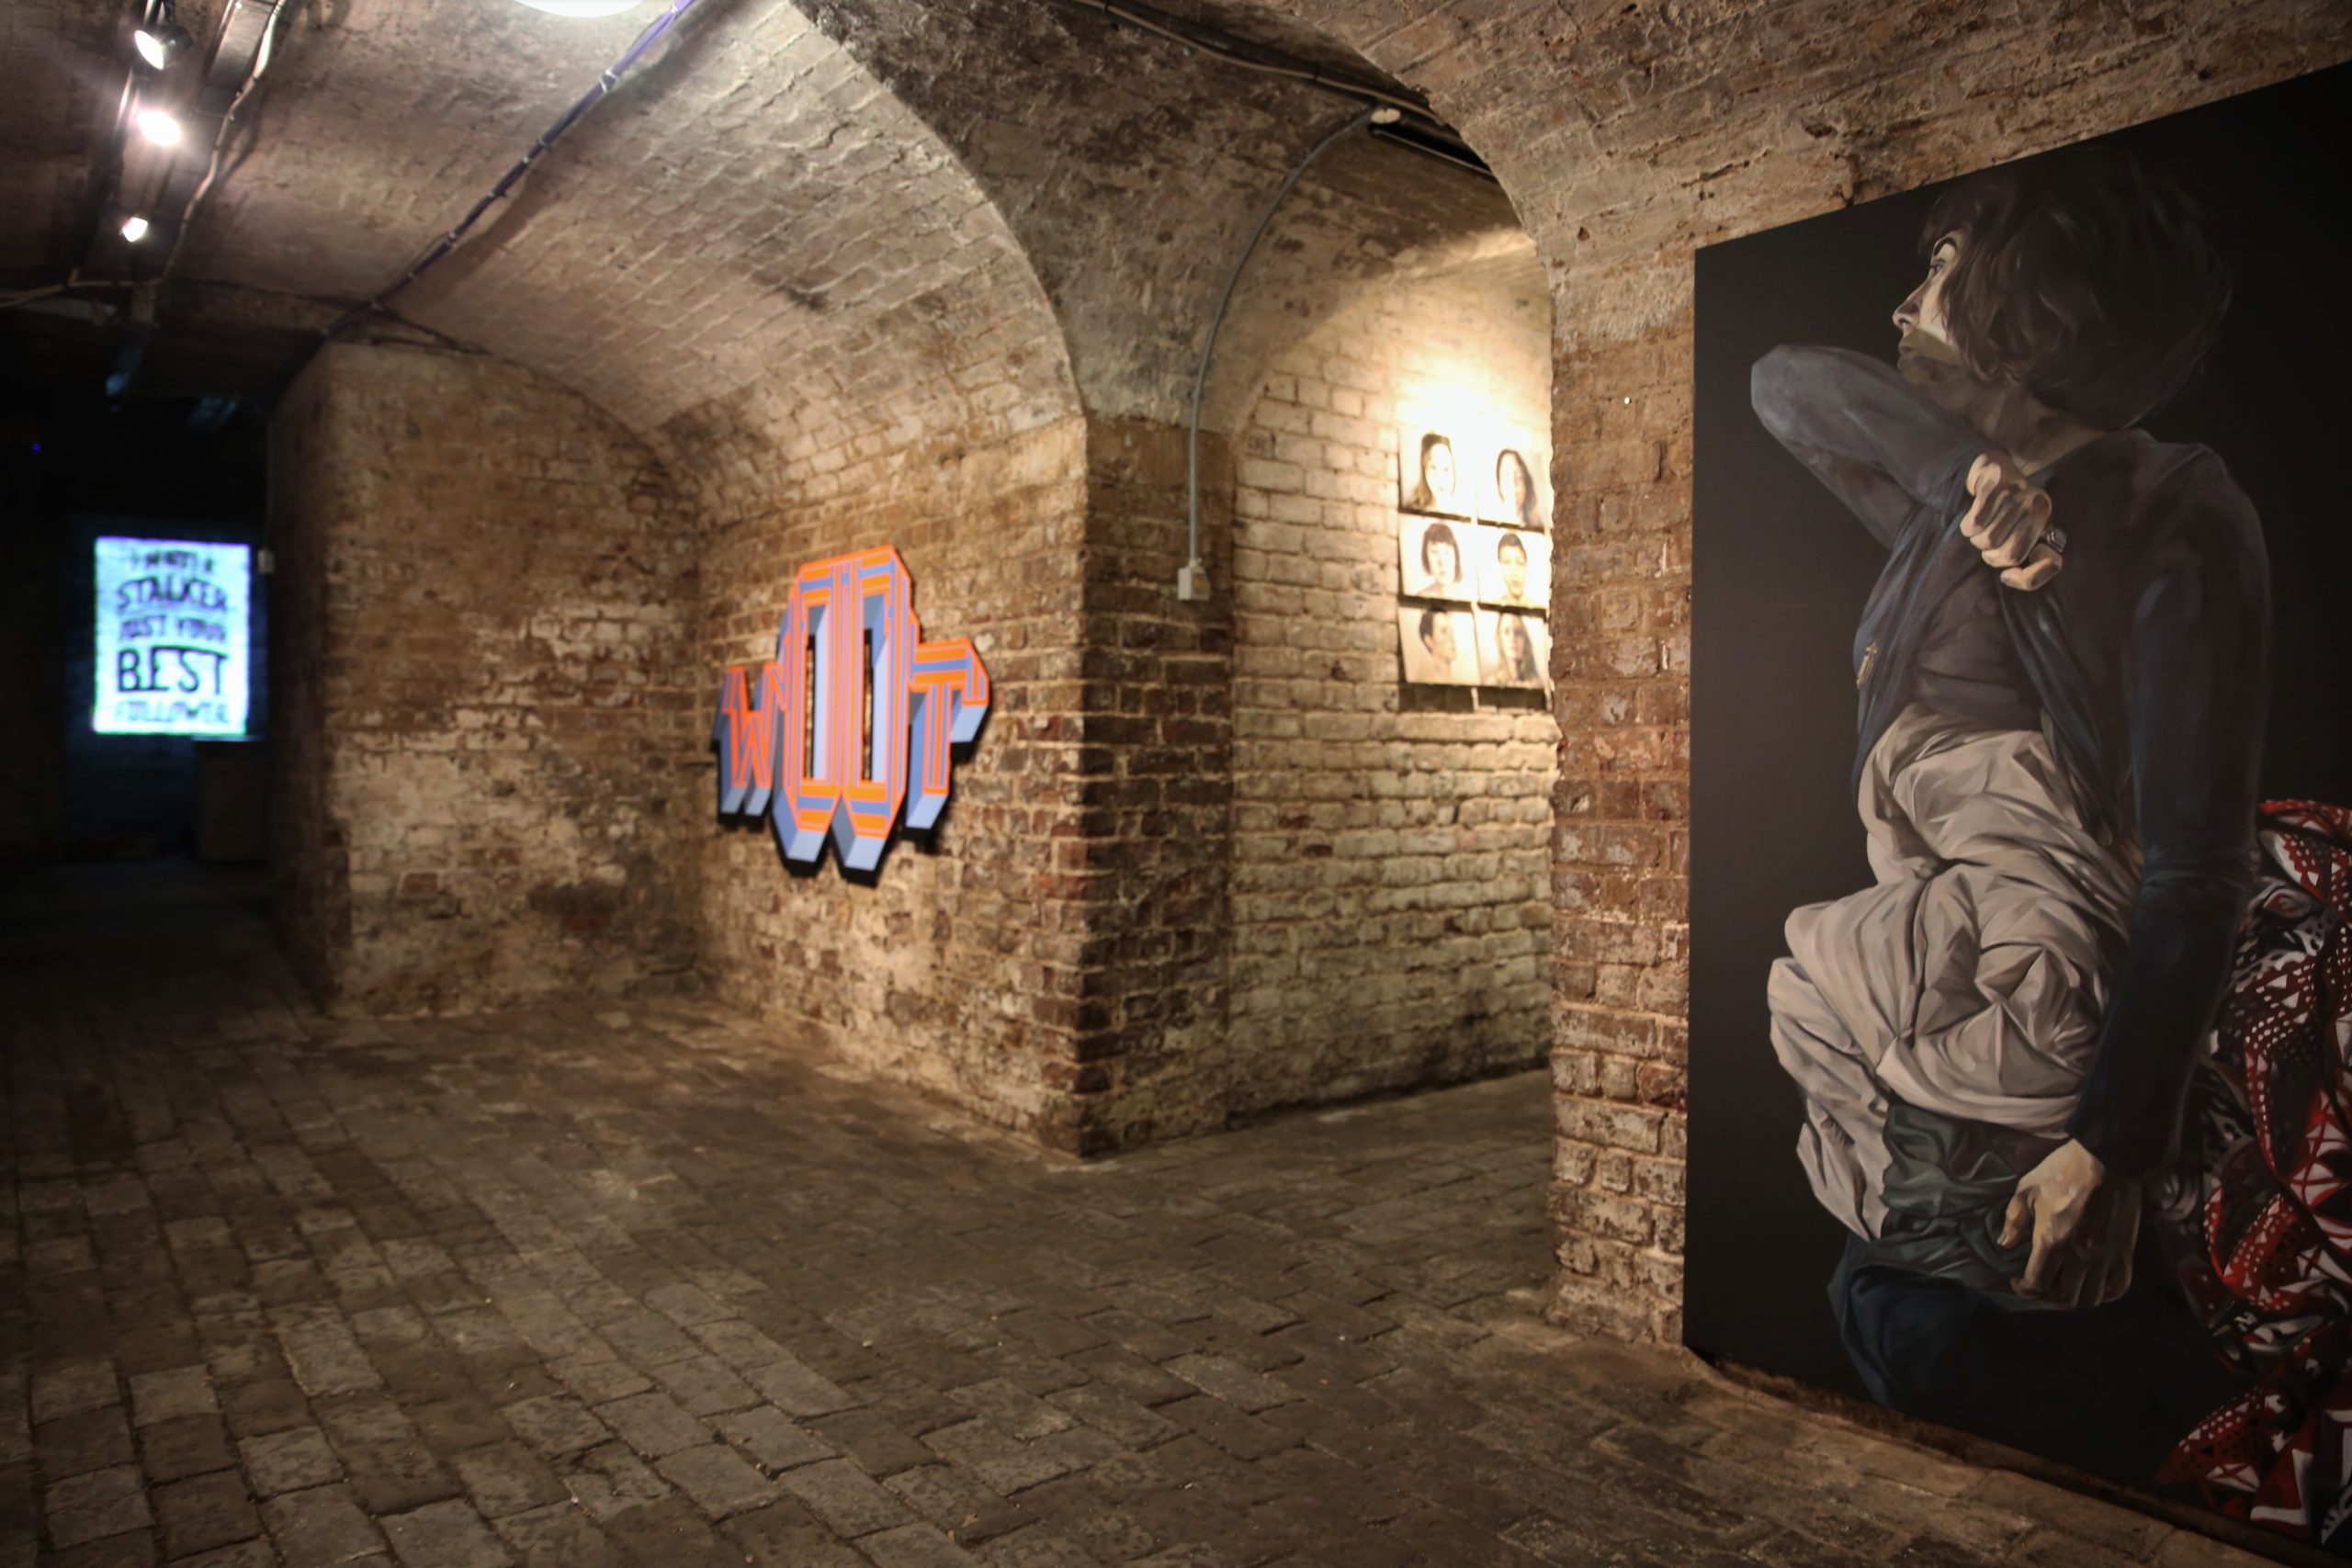 You do You, agence en residence, the crypt gallery, London, group show, Rouge, Priyesh Trivedi, Green Riot, Printemps, Dolly Devy, exposition, art